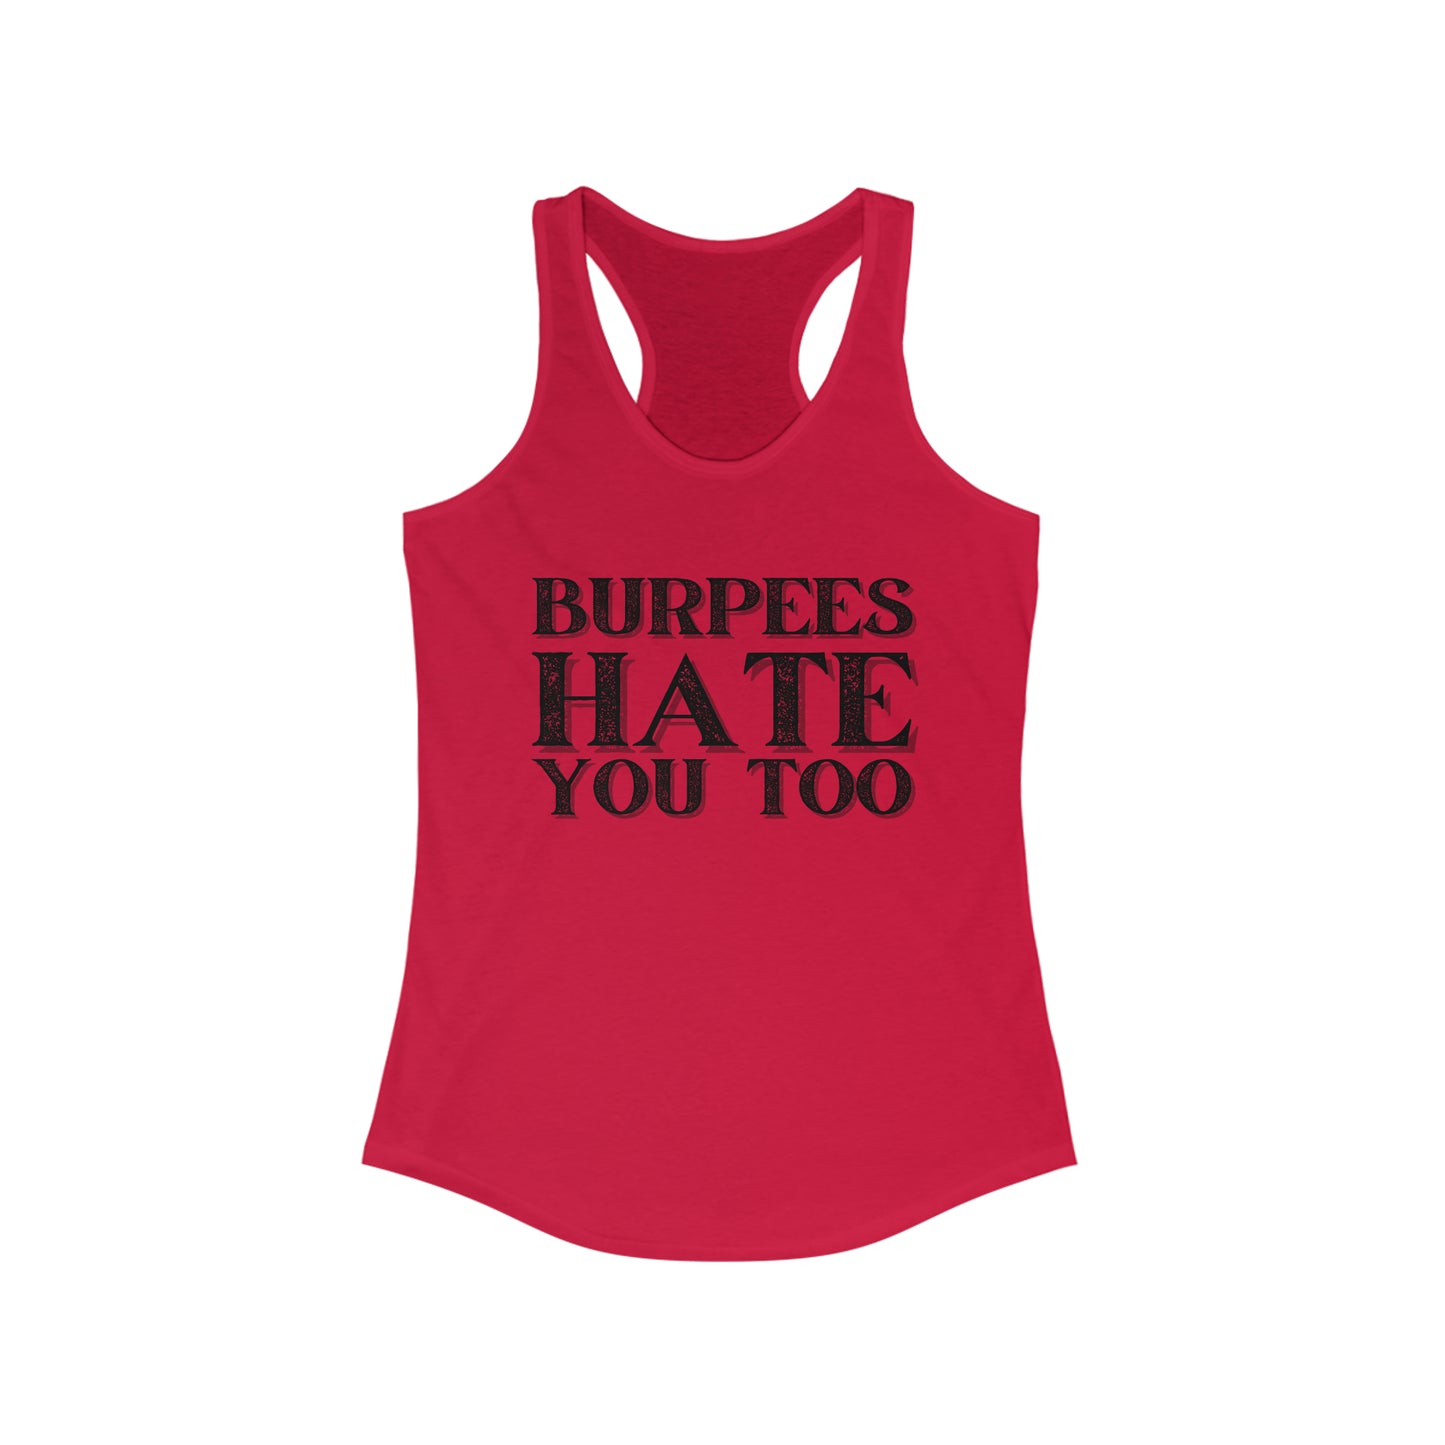 Burpees hate you too tank top